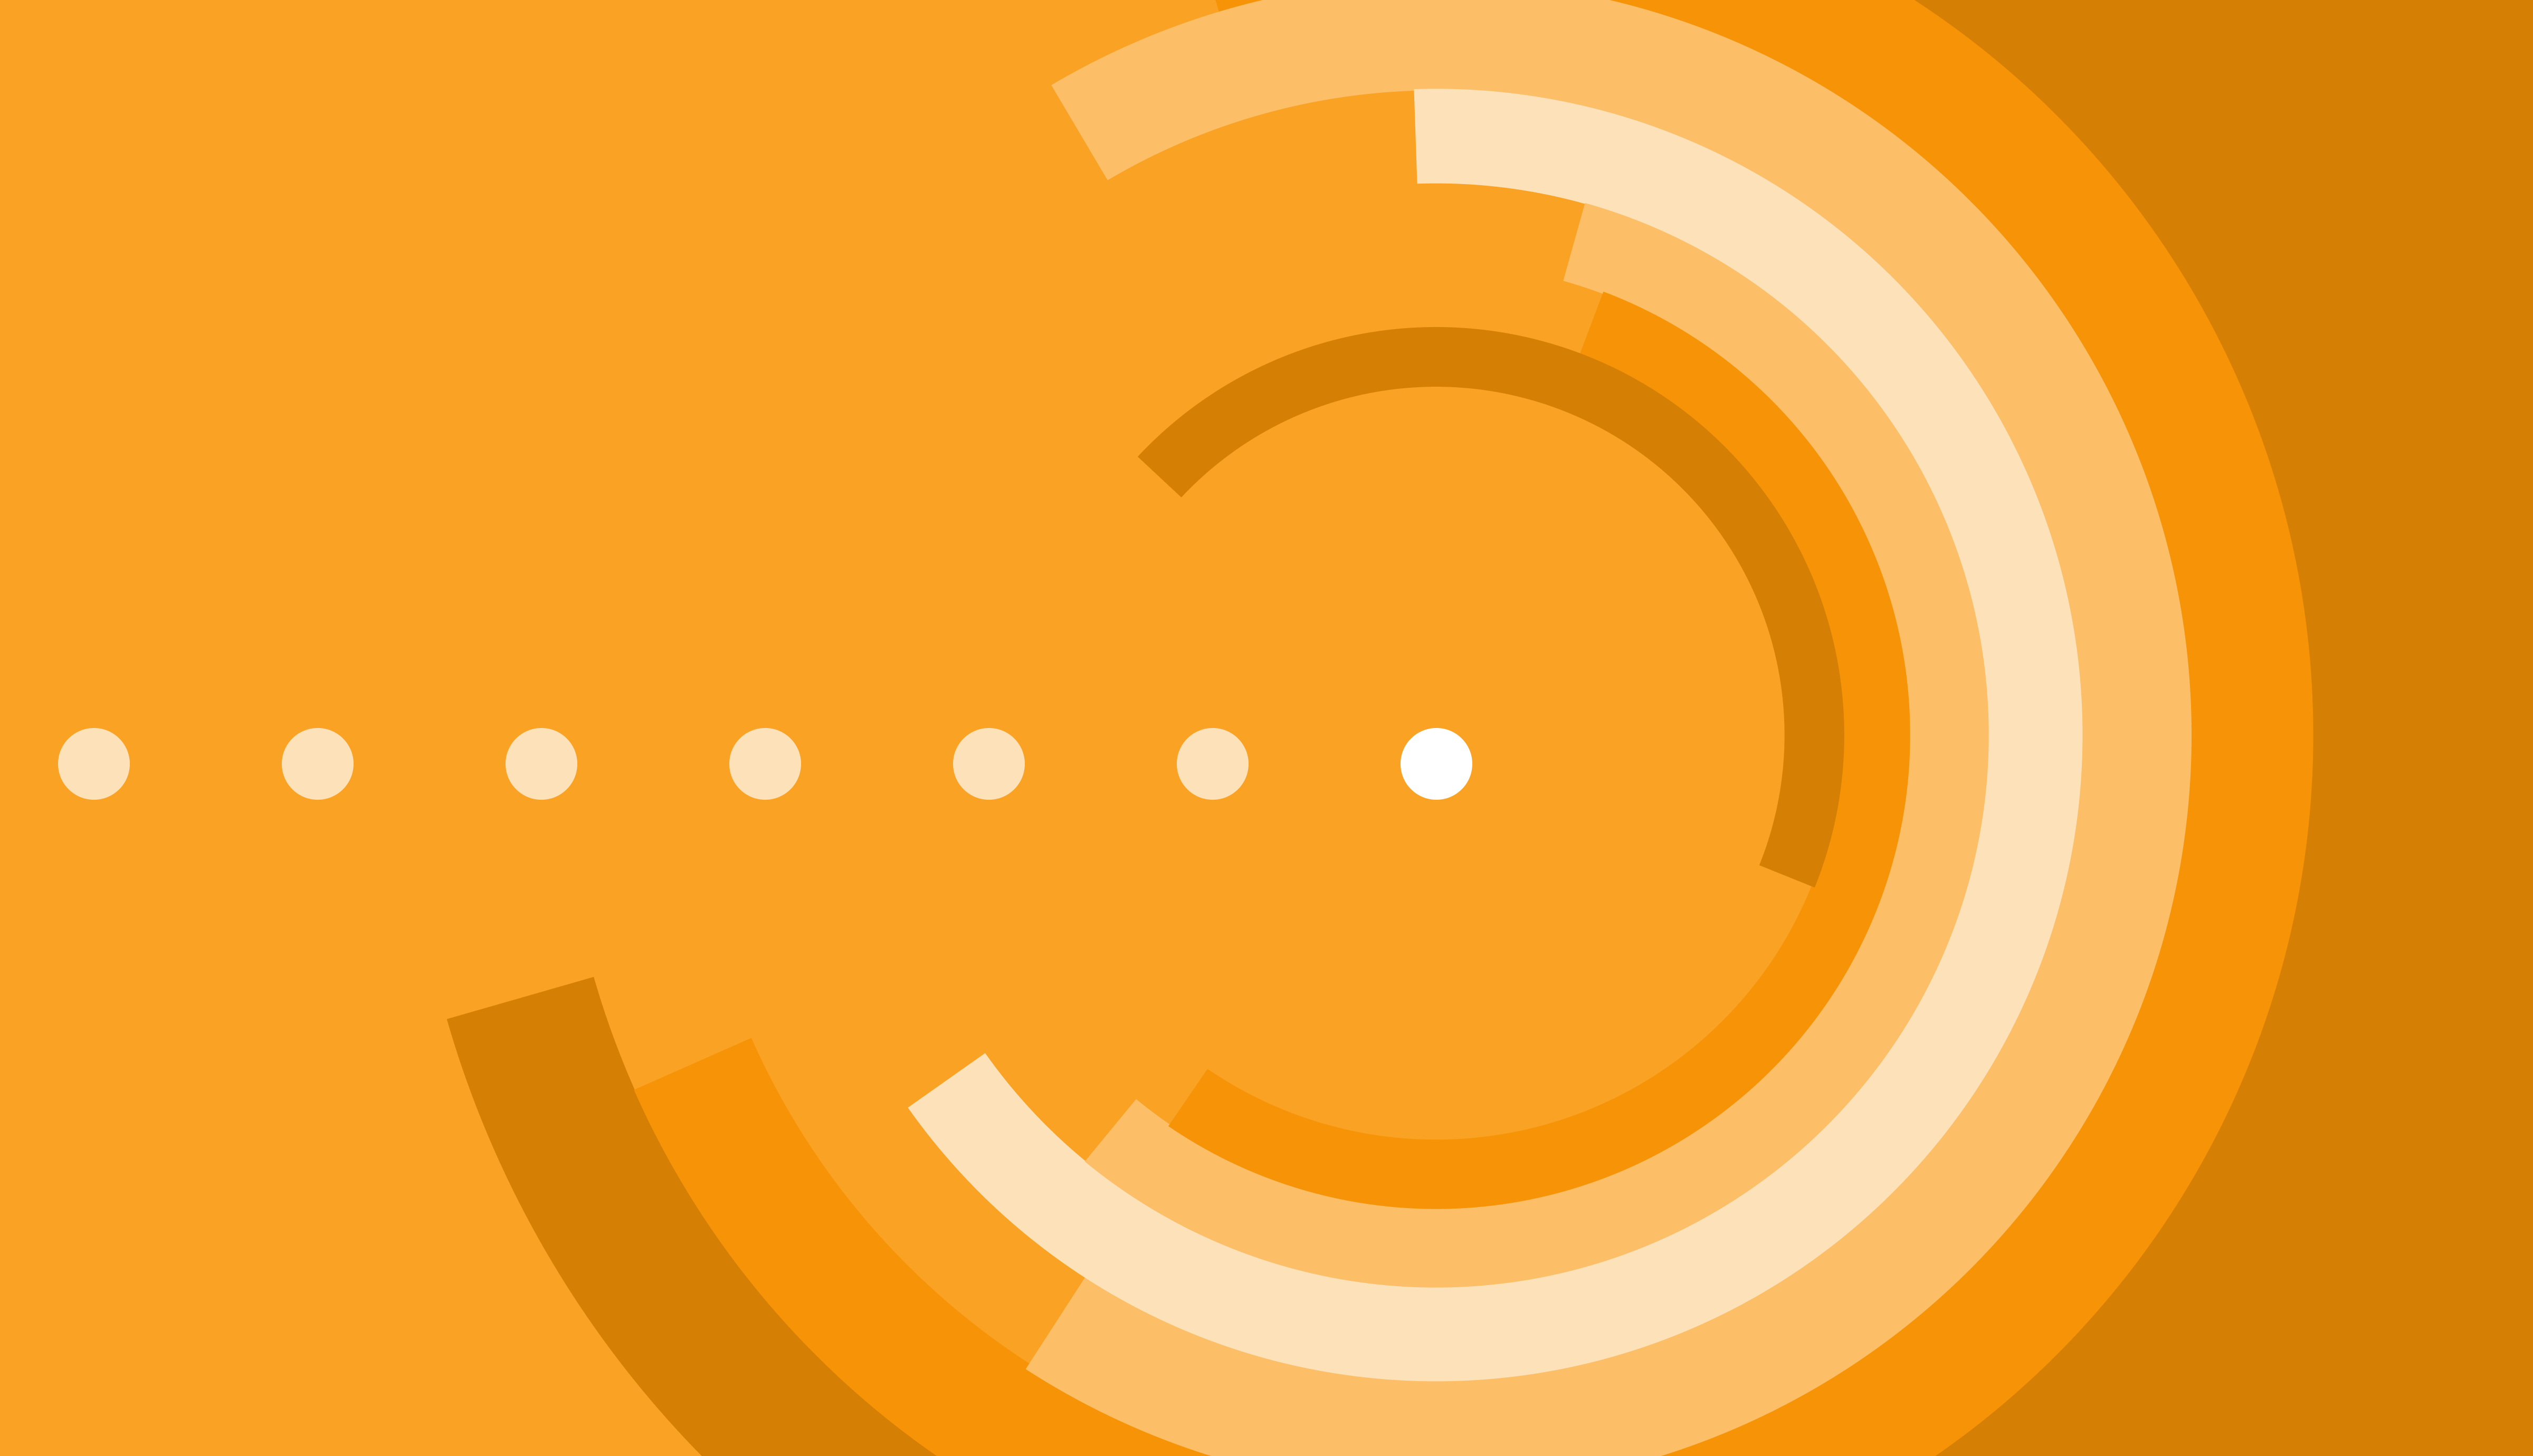 Nestled partial pieces of a circle, in different shades of orange and cream, against an orange background, with a horizontal row of dots from the center of the frame to the leftmost edge.